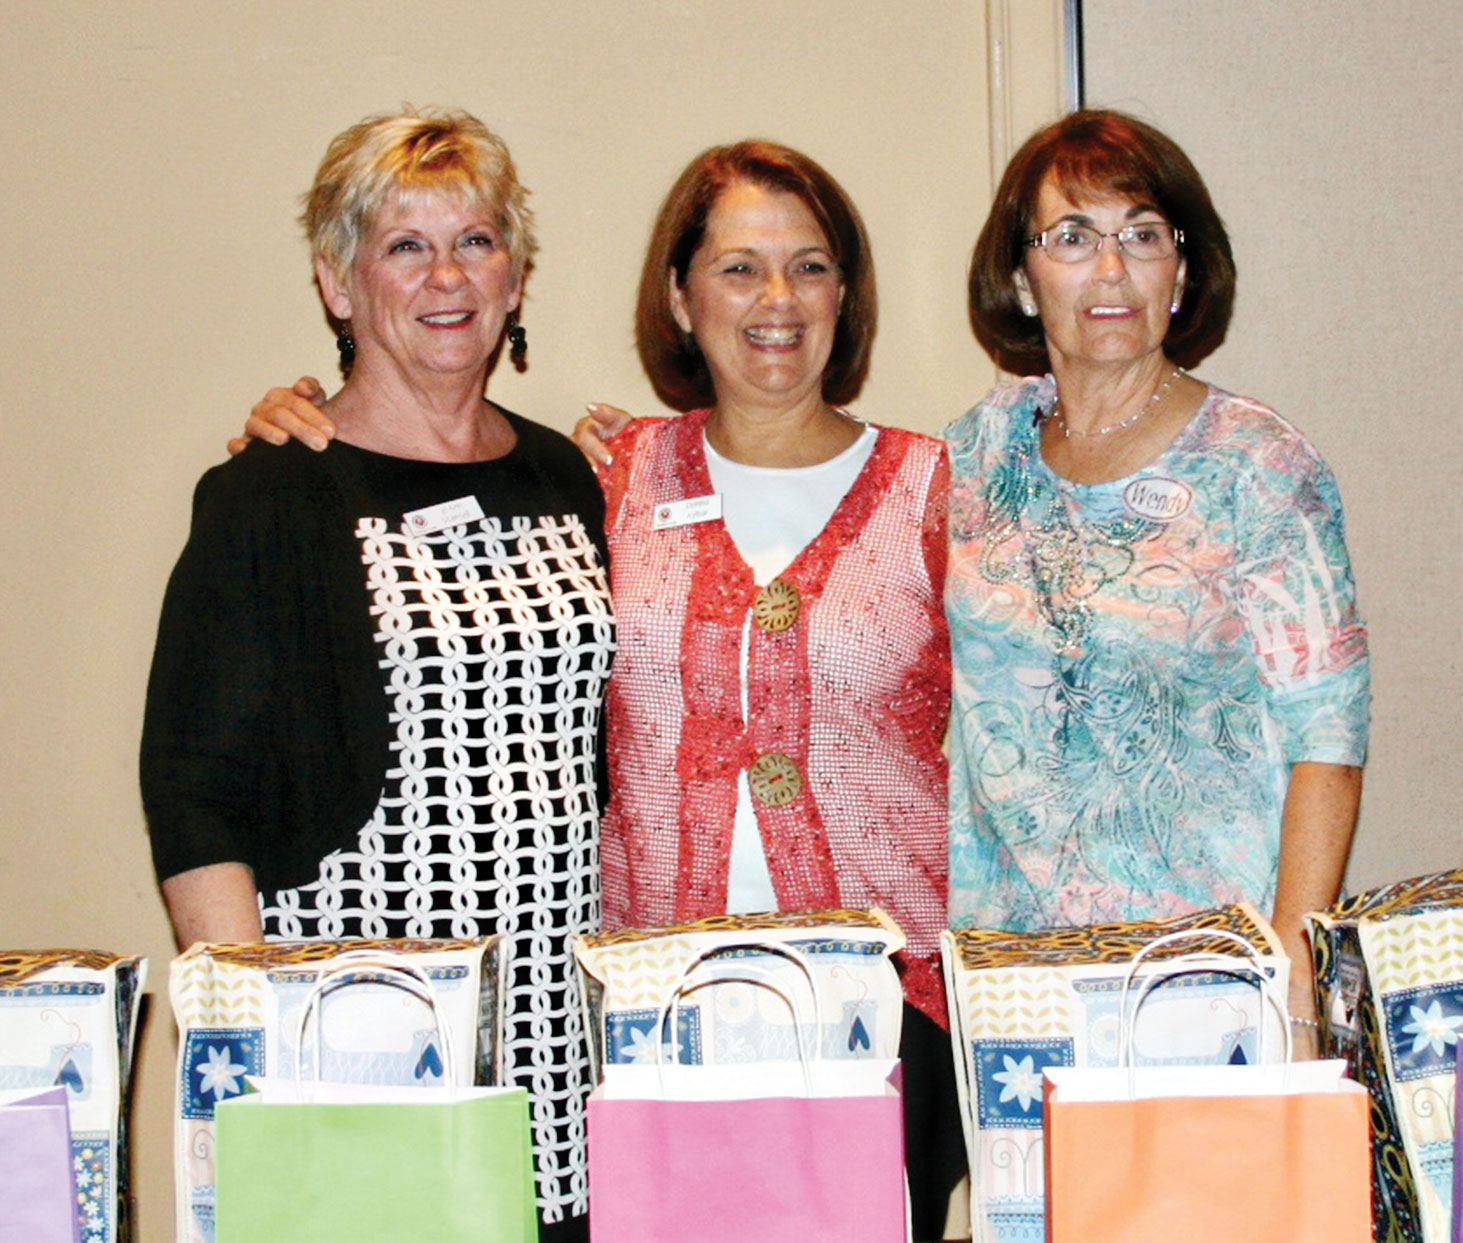 Door prize gals, left to right: JoAnn Stansell, Donna Aybar, Wendy Gilbert